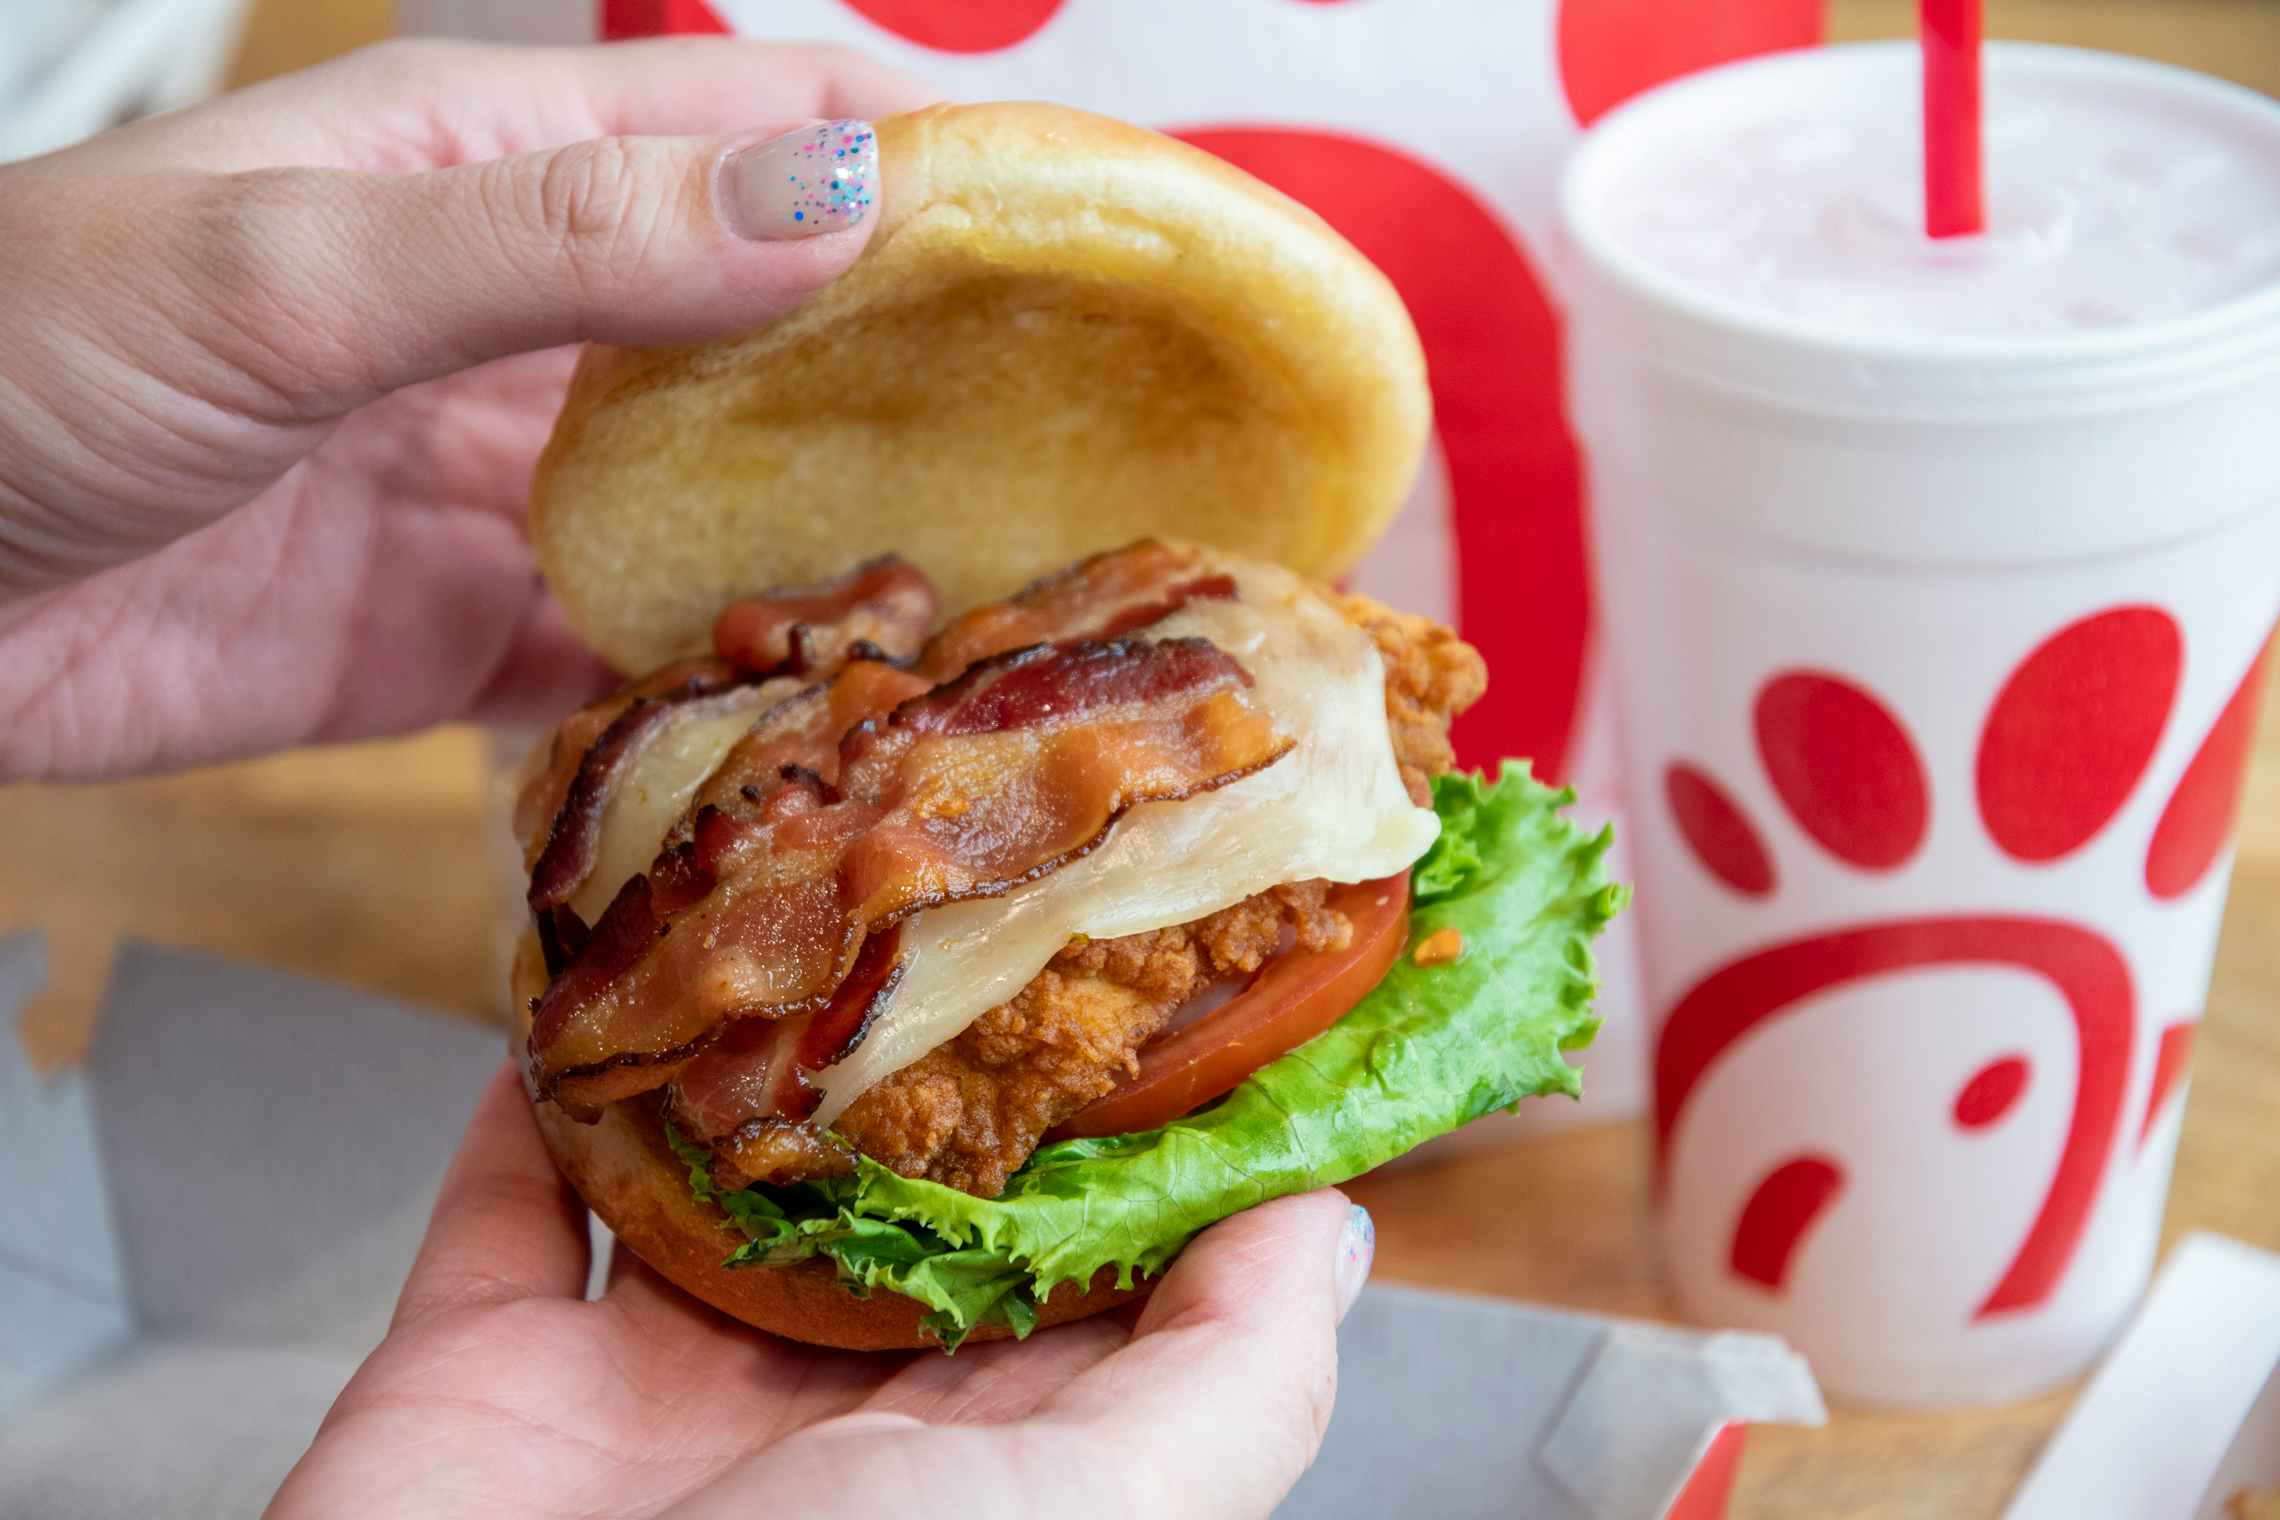 A person's hands lifting the top bun off of a Chick-fil-A chicken sandwich with bacon to show the ingredients. On the table in the background is a Chick-fil-A bag and drink cup.